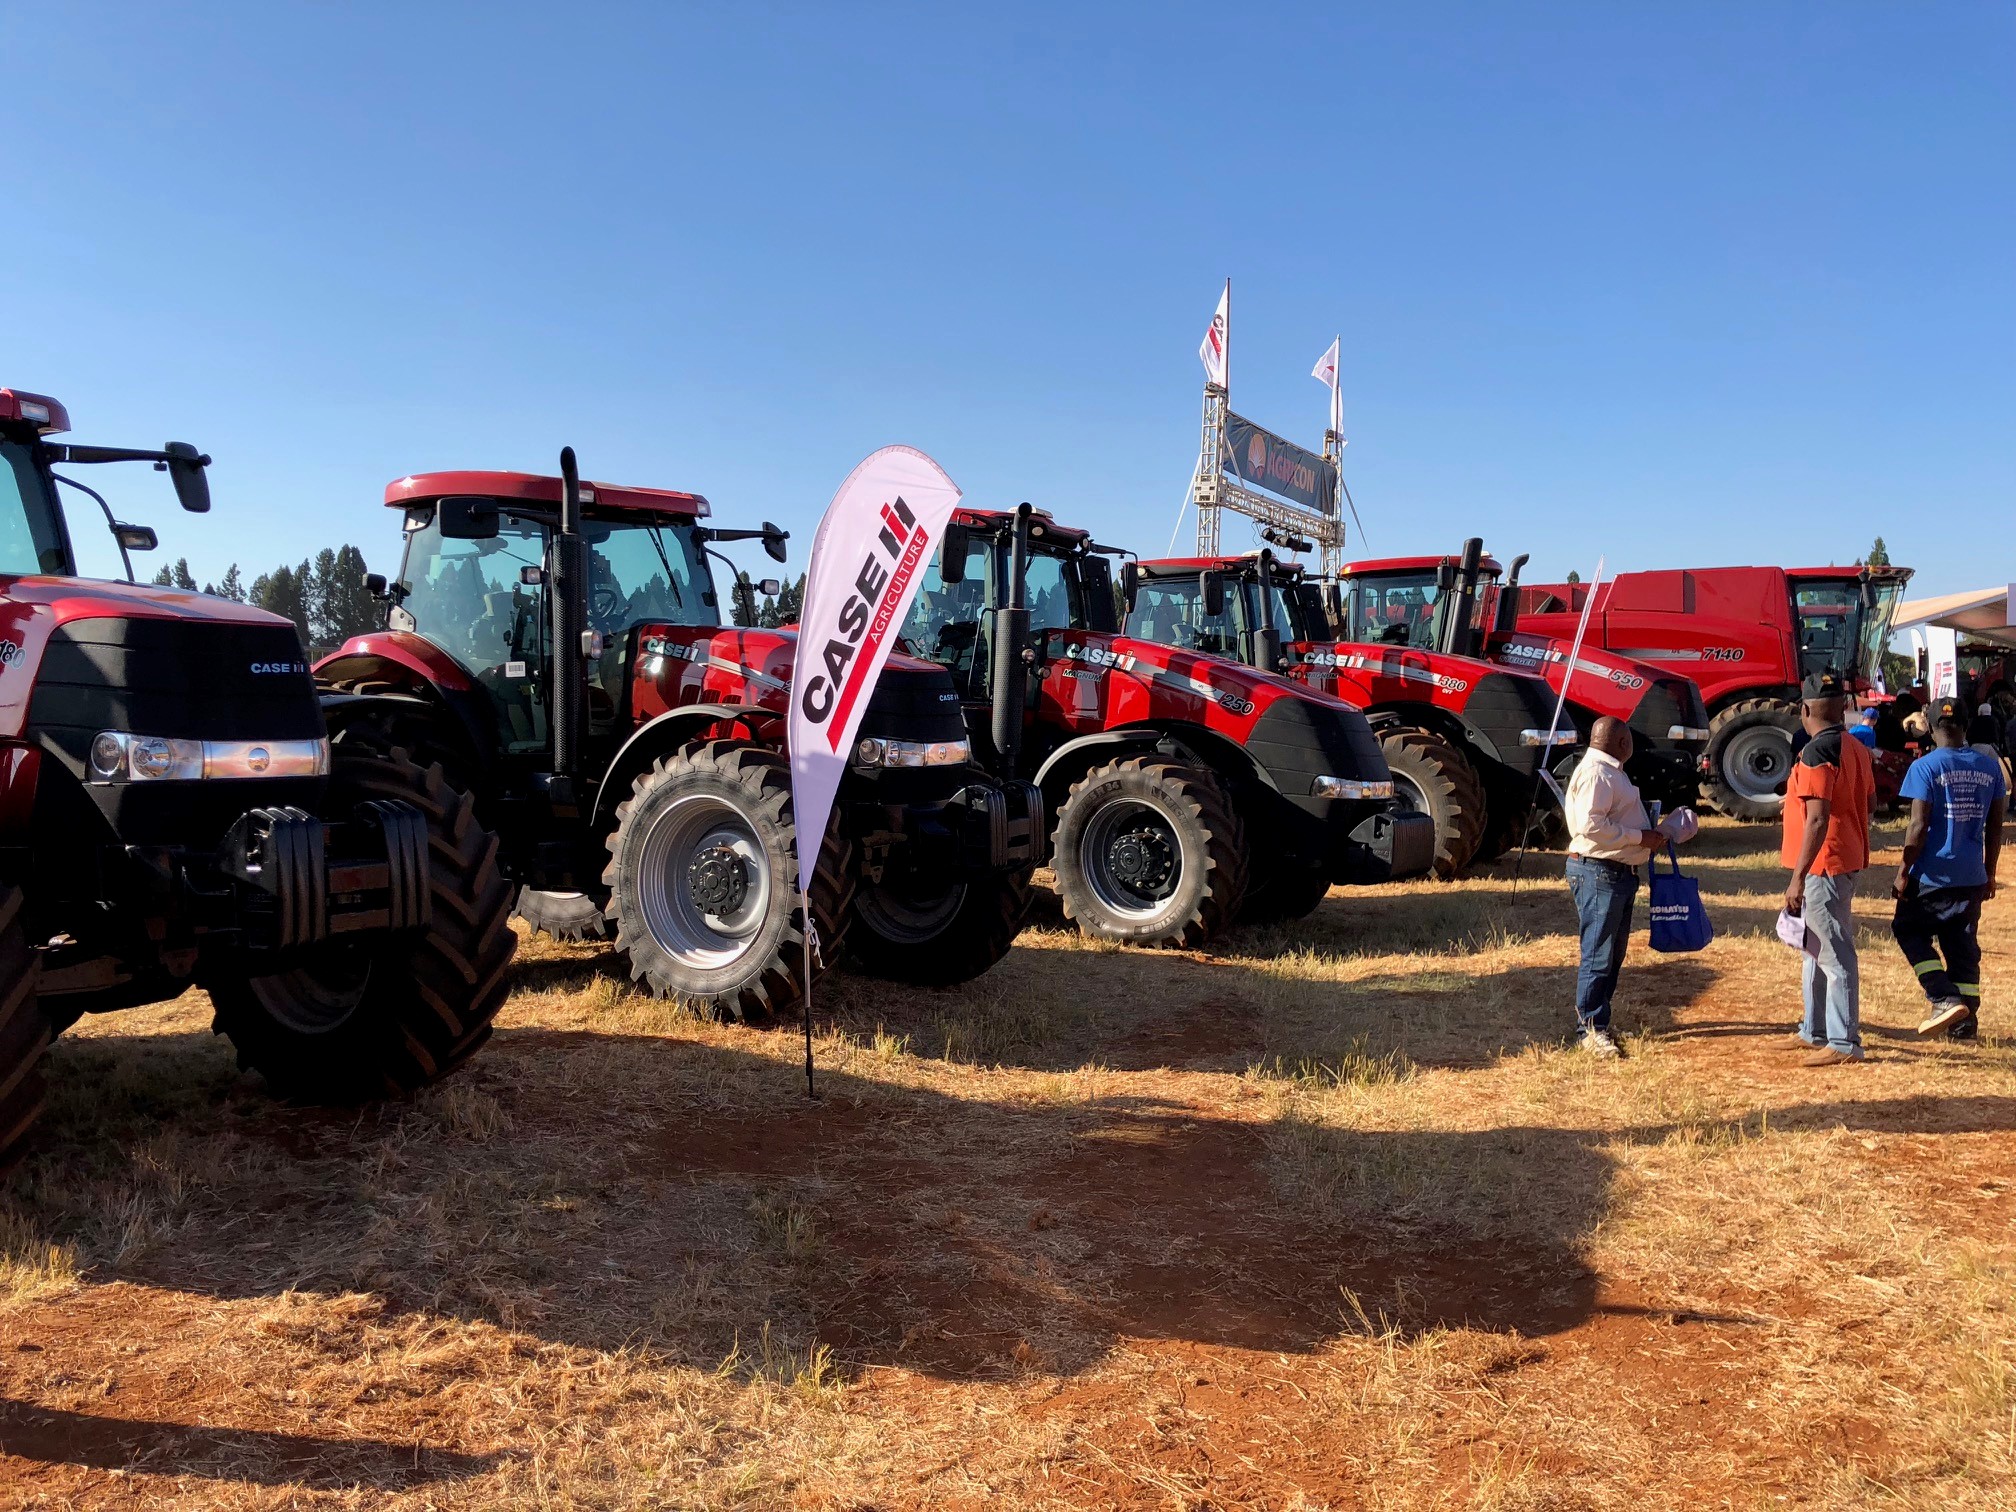 CASE IH PROVES EQUIPMENT ROBUSTNESS AND SERVICE EXCELLENCE AT ADMA AGRISHOW